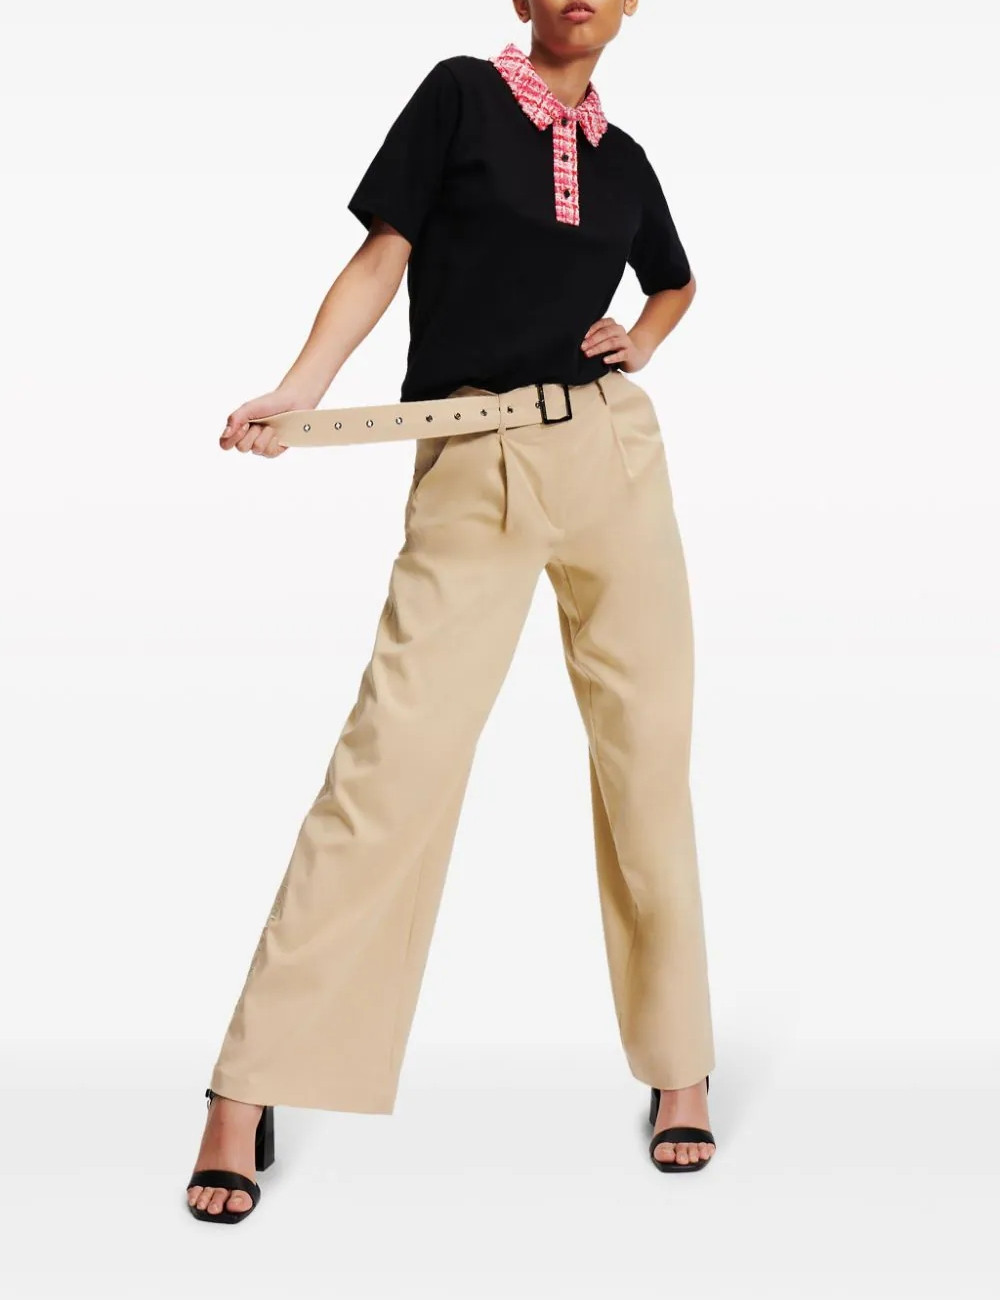 Women's High Rise Trousers